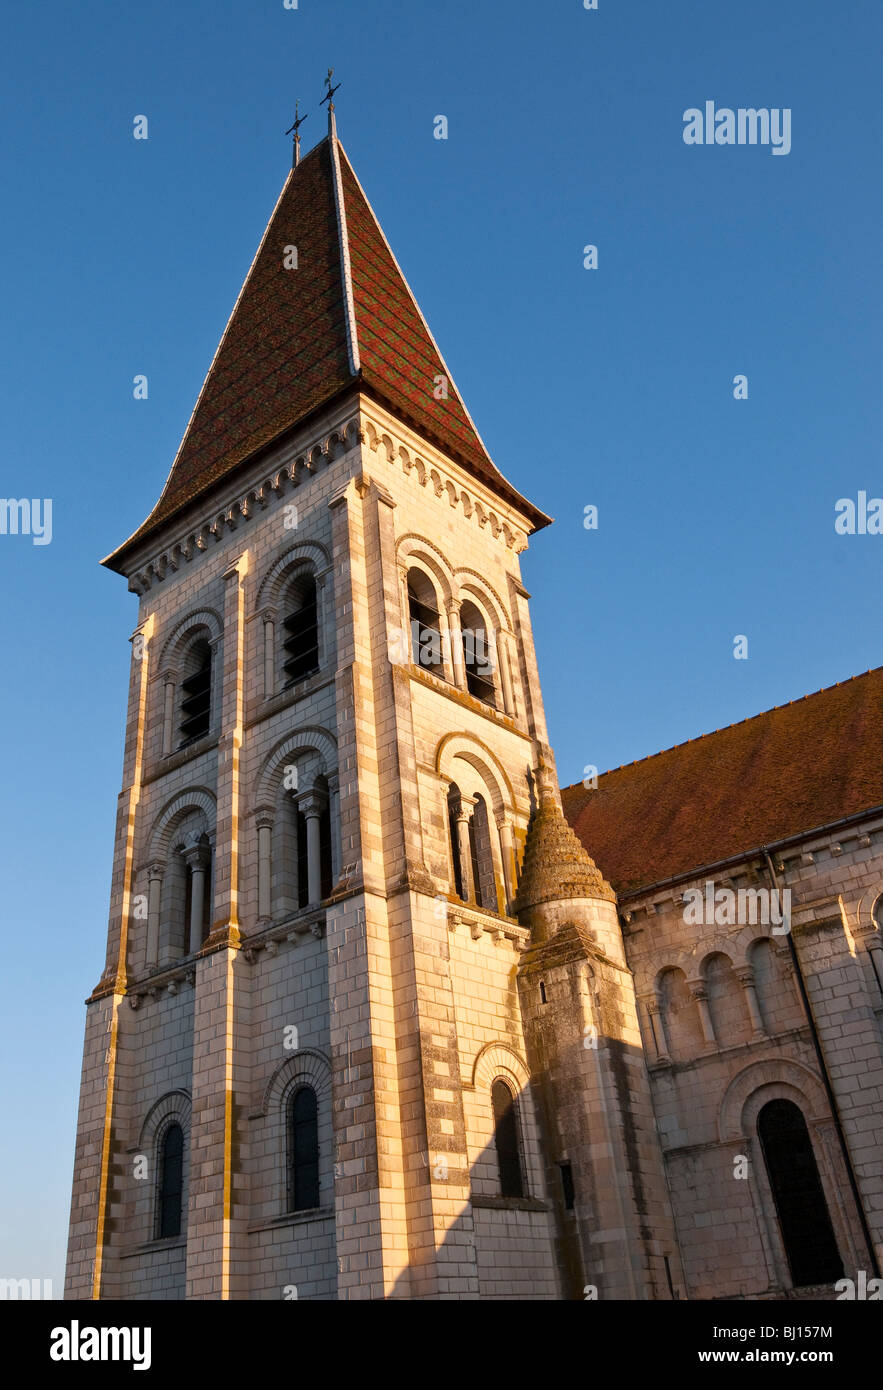 Preuilly-sur-Claise church bell tower, Indre-et-Loire, France. Stock Photo